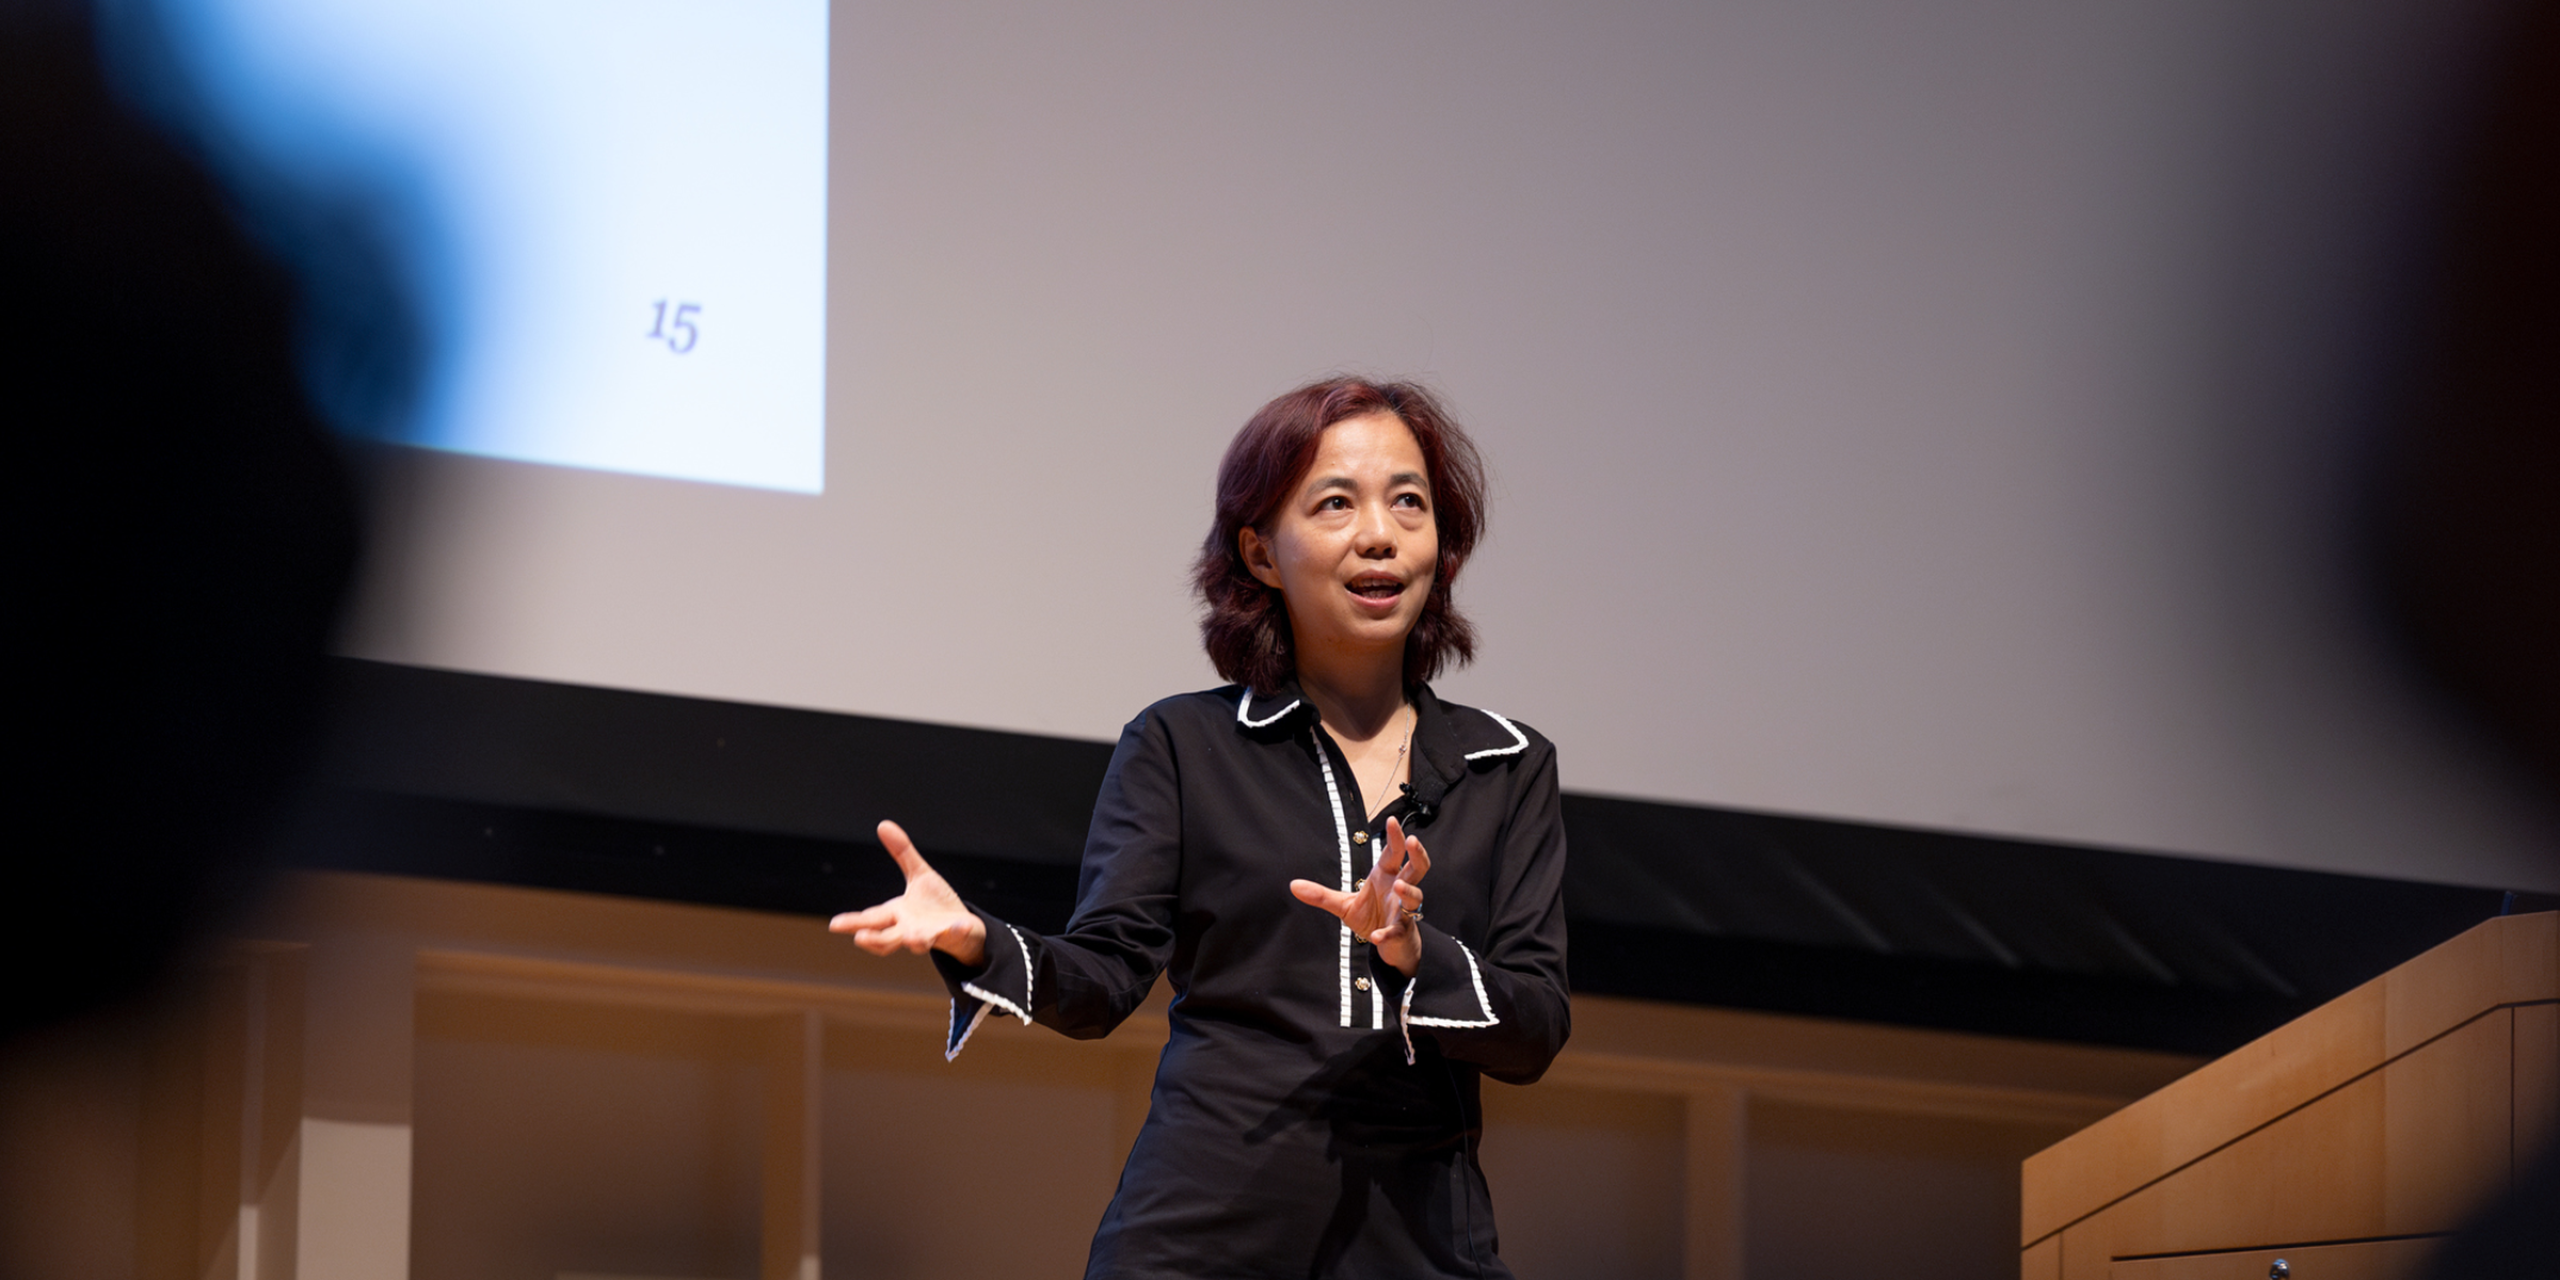 Image of Dr. Fei-Fei Li presenting at CCSS Annual Lecture in Statler Auditorium